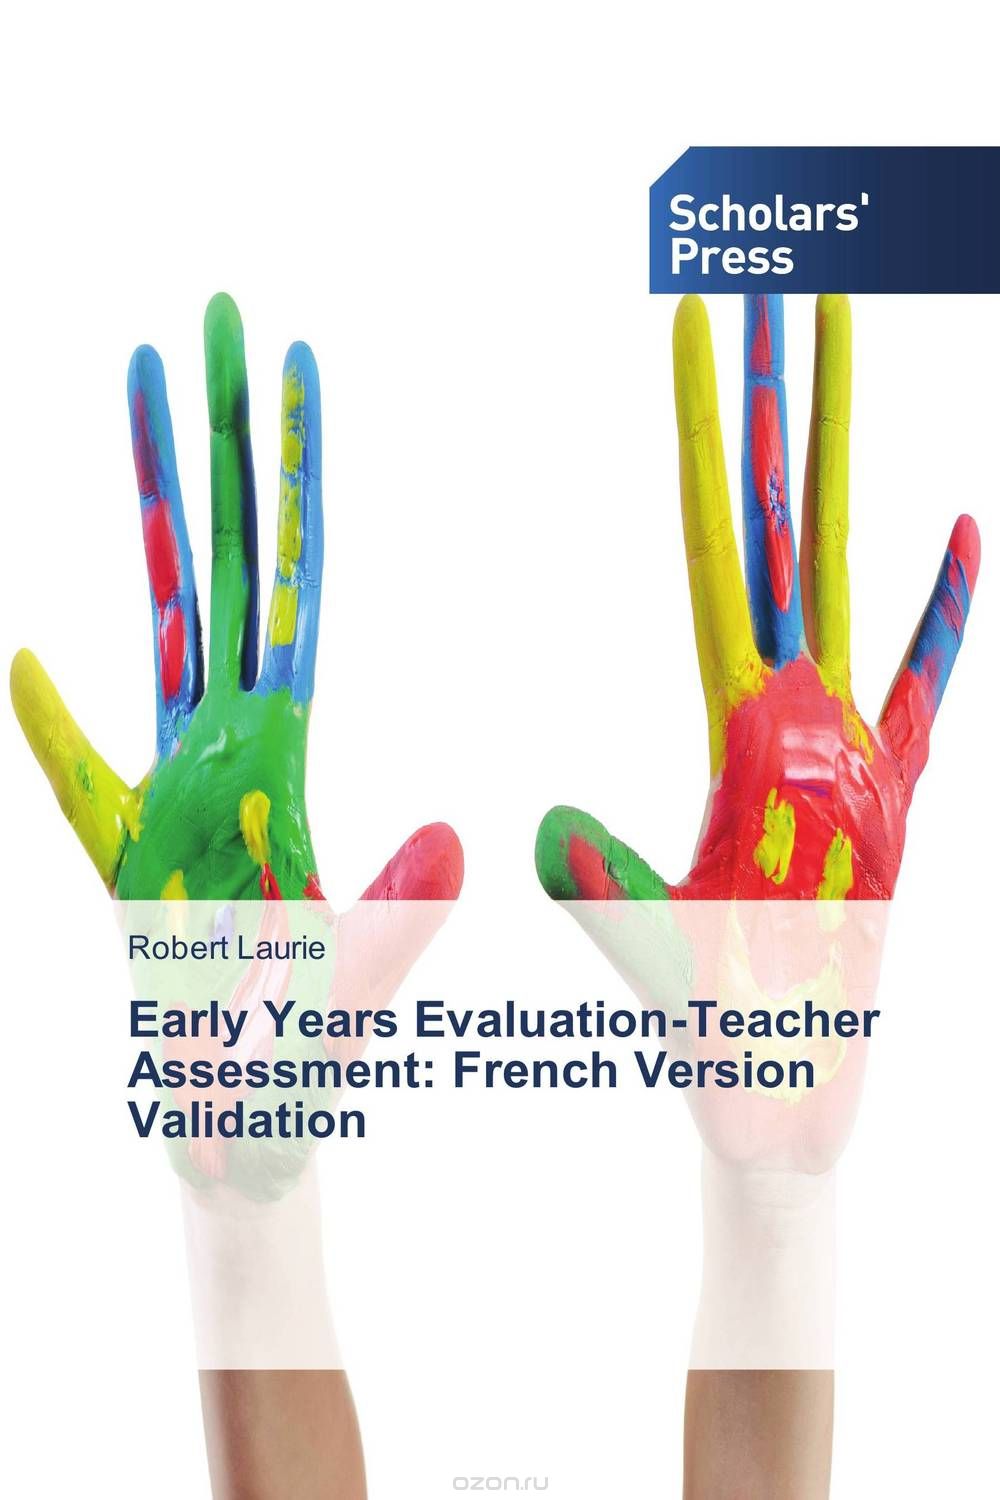 Early Years Evaluation-Teacher Assessment: French Version Validation